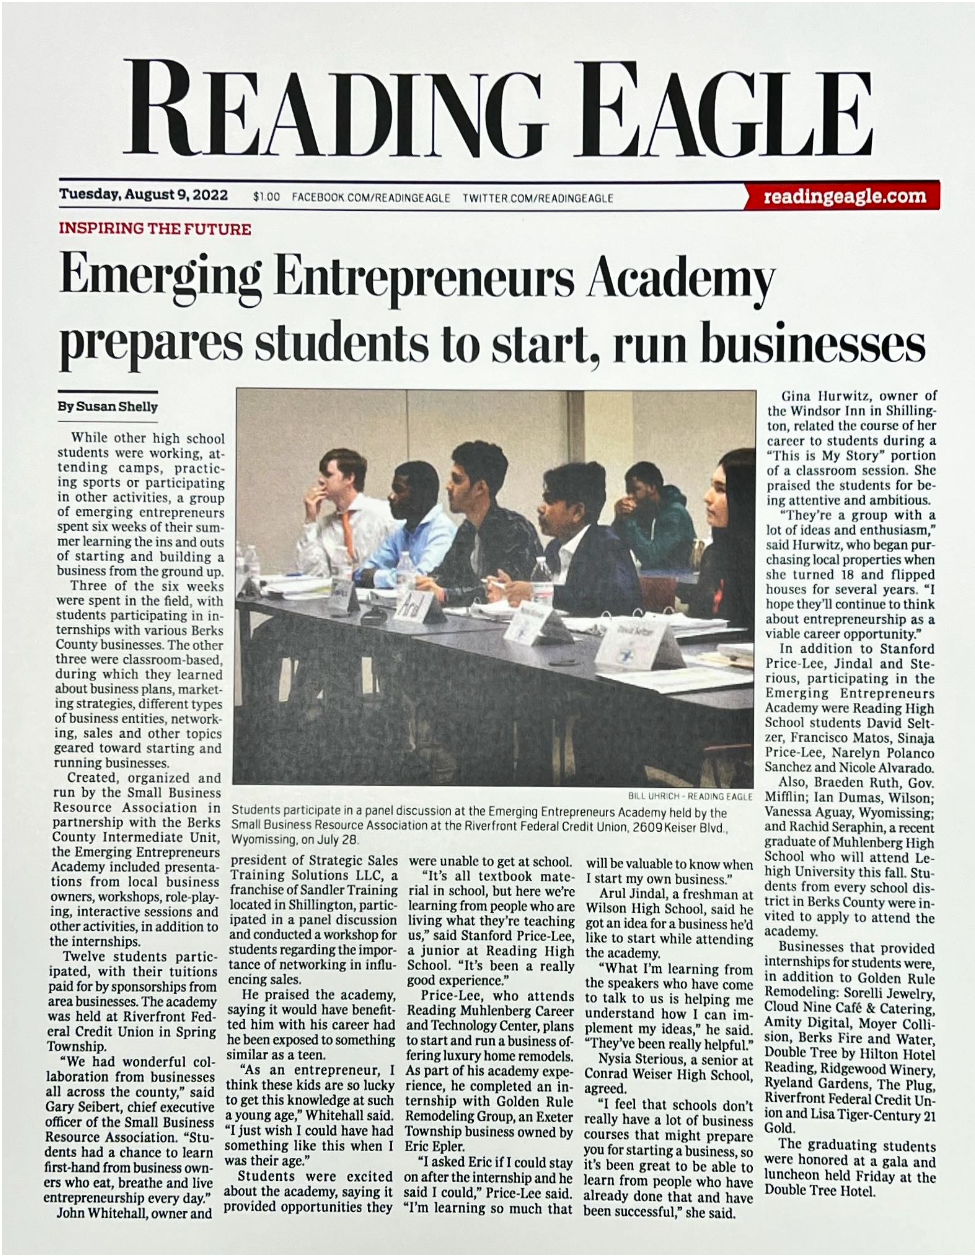 Reading Eagle 2022 Article on the Emerging Entrepreneurs Academy in Berks County, PA